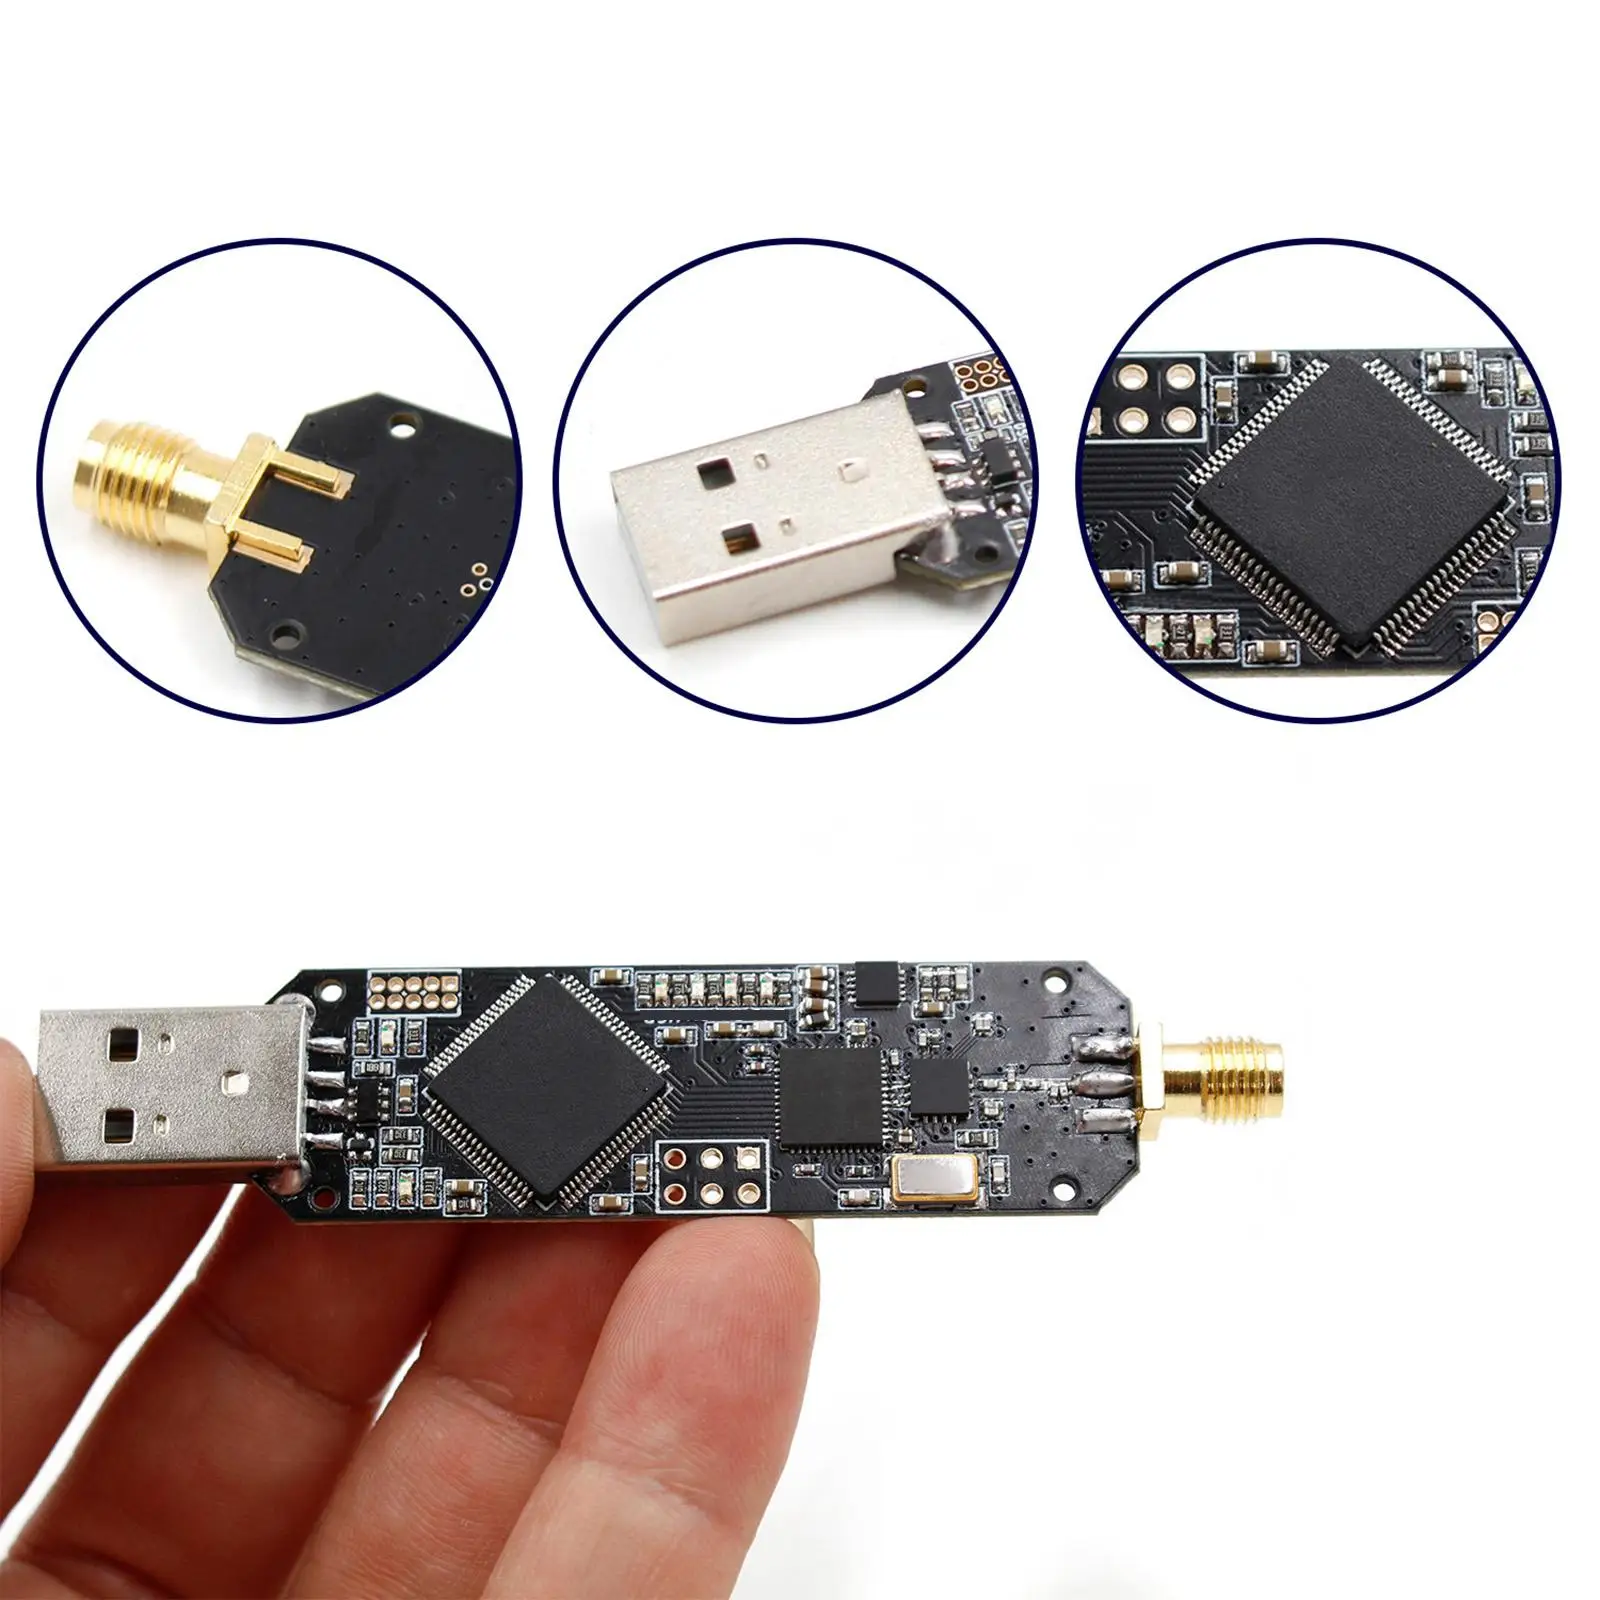 2.4G Ubertooth One Bluetooth Sniffer Open Source Test BLE 1PC 50-Mil Jtag Bluetooth protocol Analysis 10-Pin for Home Windows PC